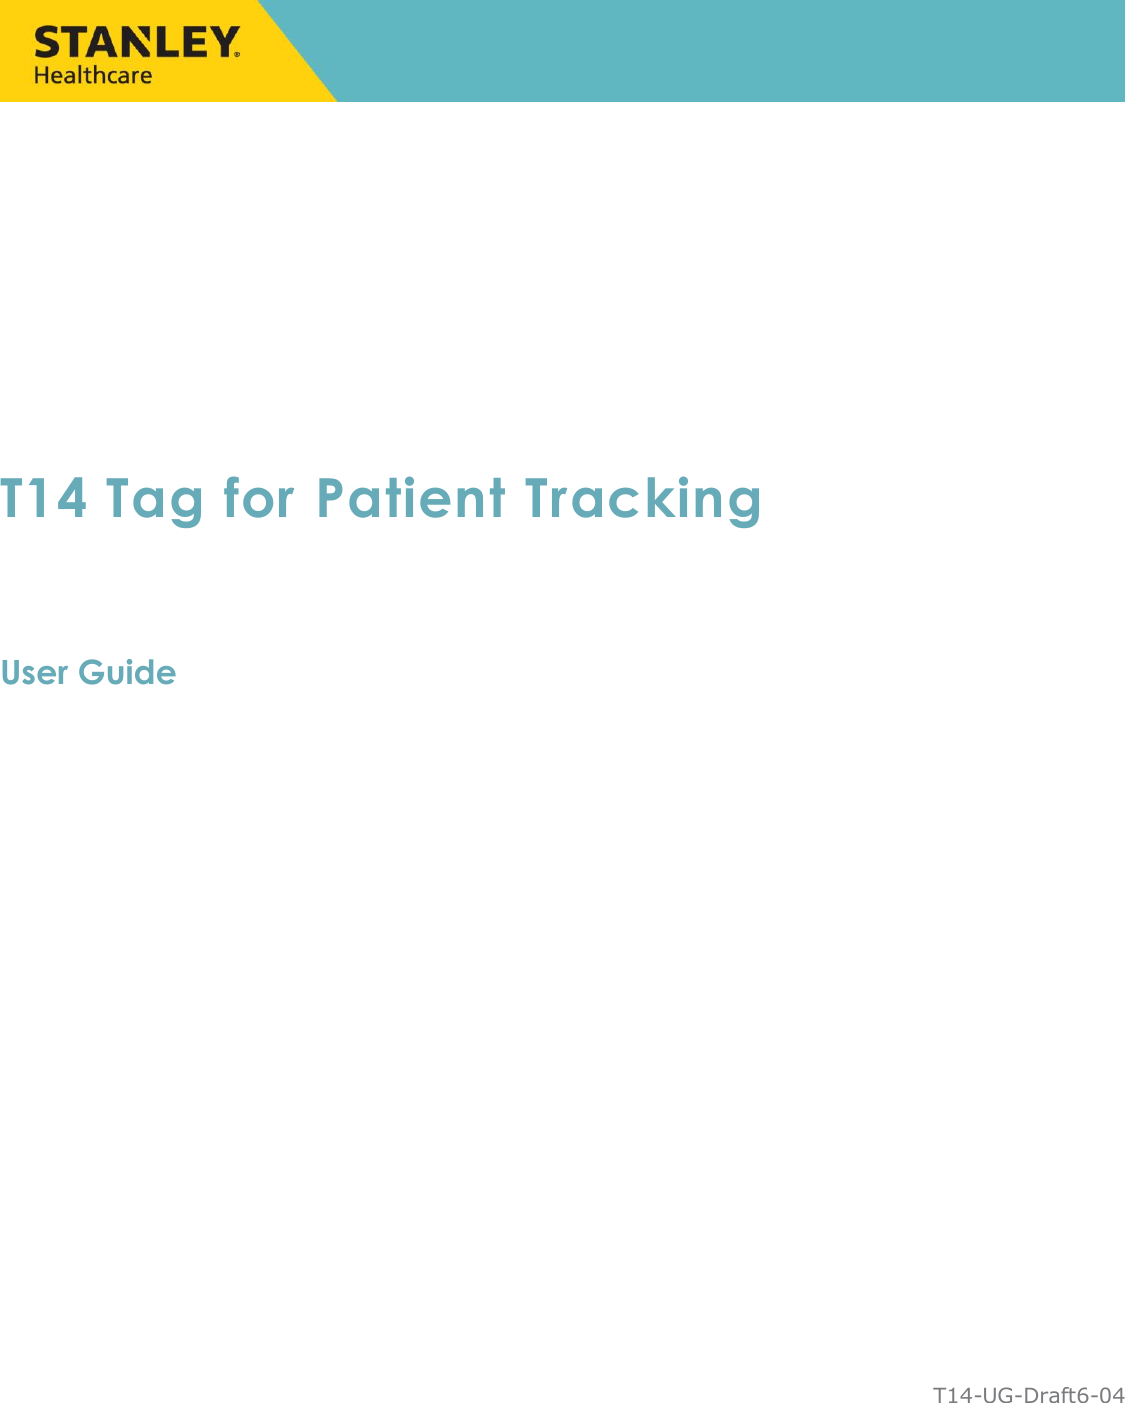    T14 Tag for Patient Tracking  User Guide   T14-UG-Draft6-04 